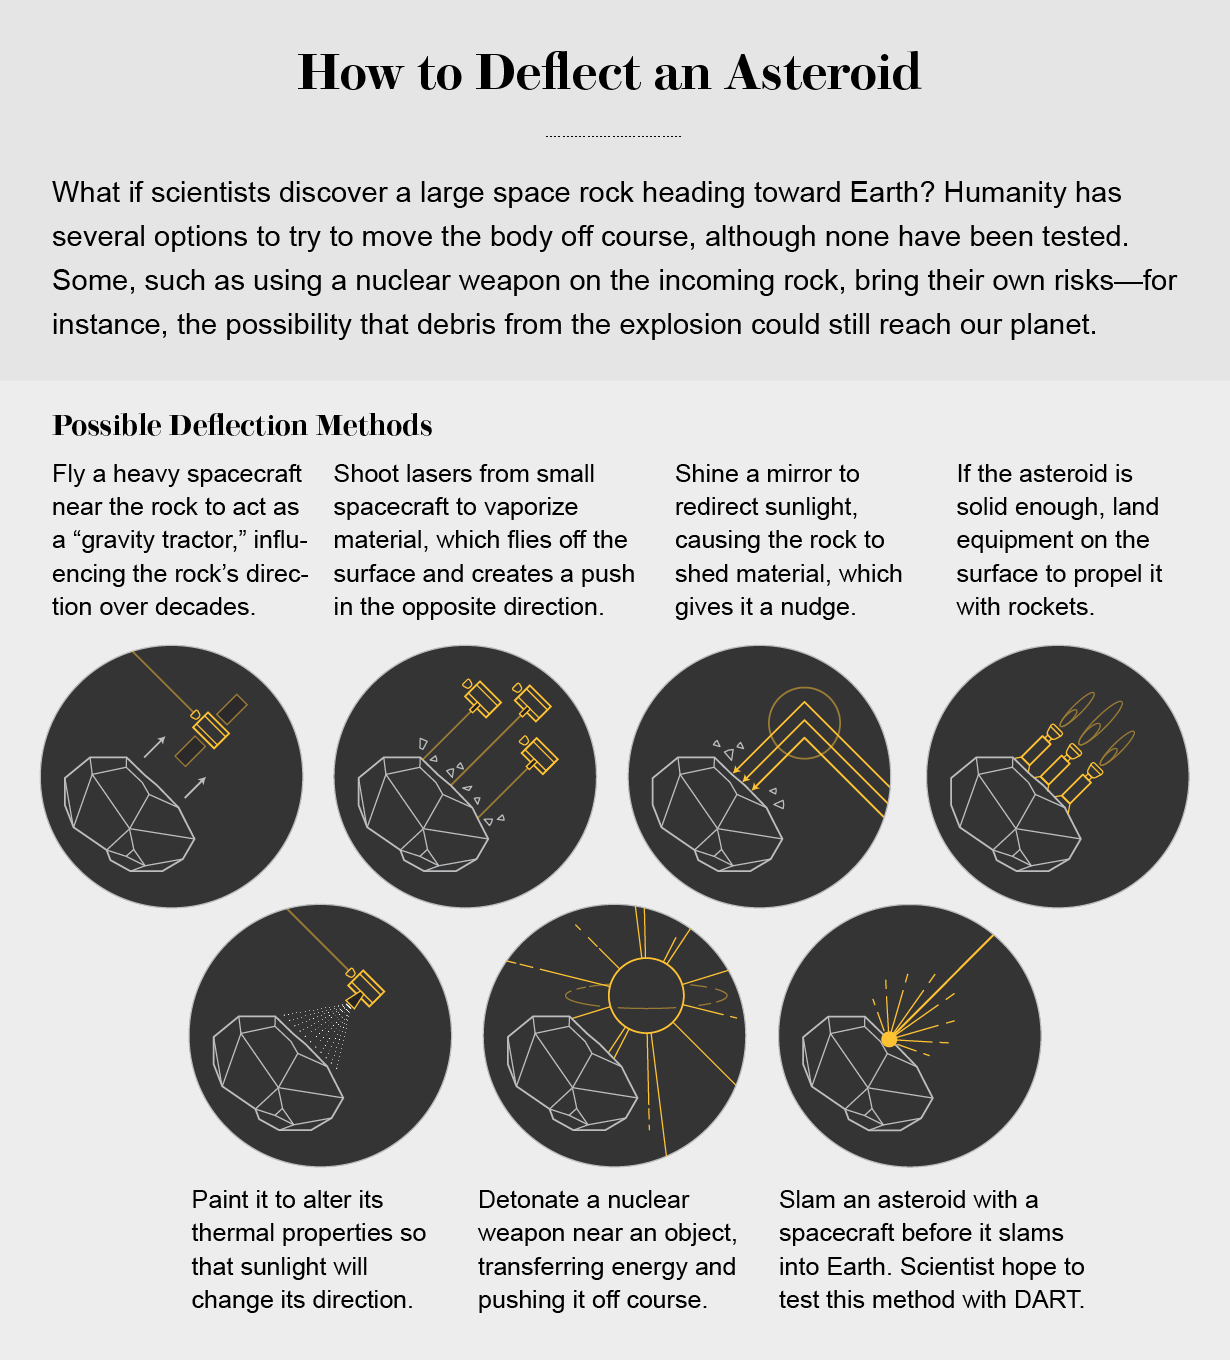 Graphic shows seven possible ways to deflect an asteroid, including the method employed by the DART mission.